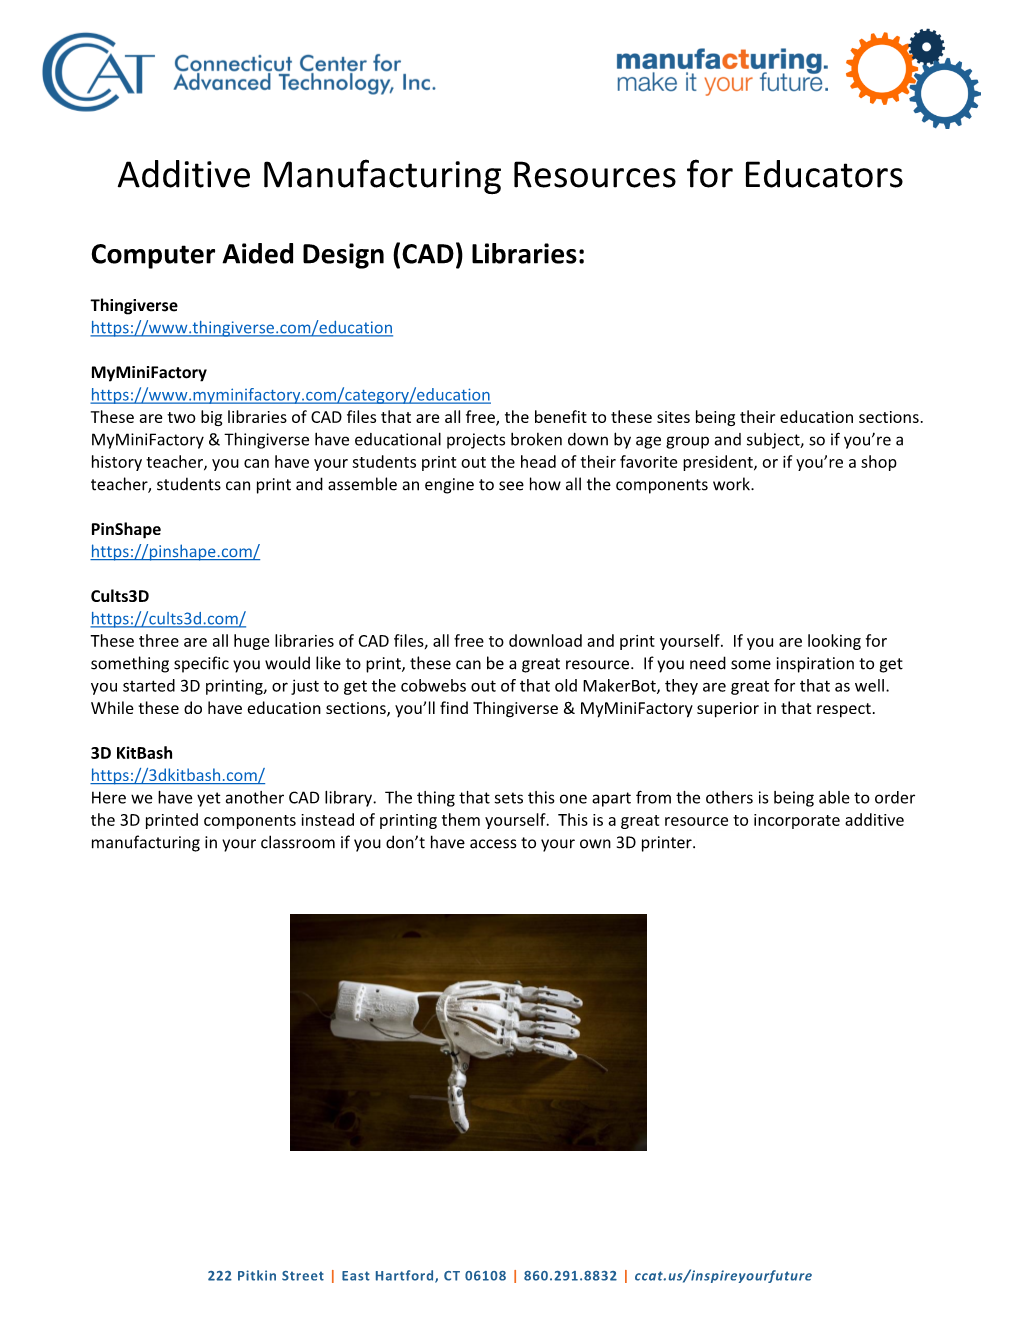 Additive Manufacturing Resources for Educators